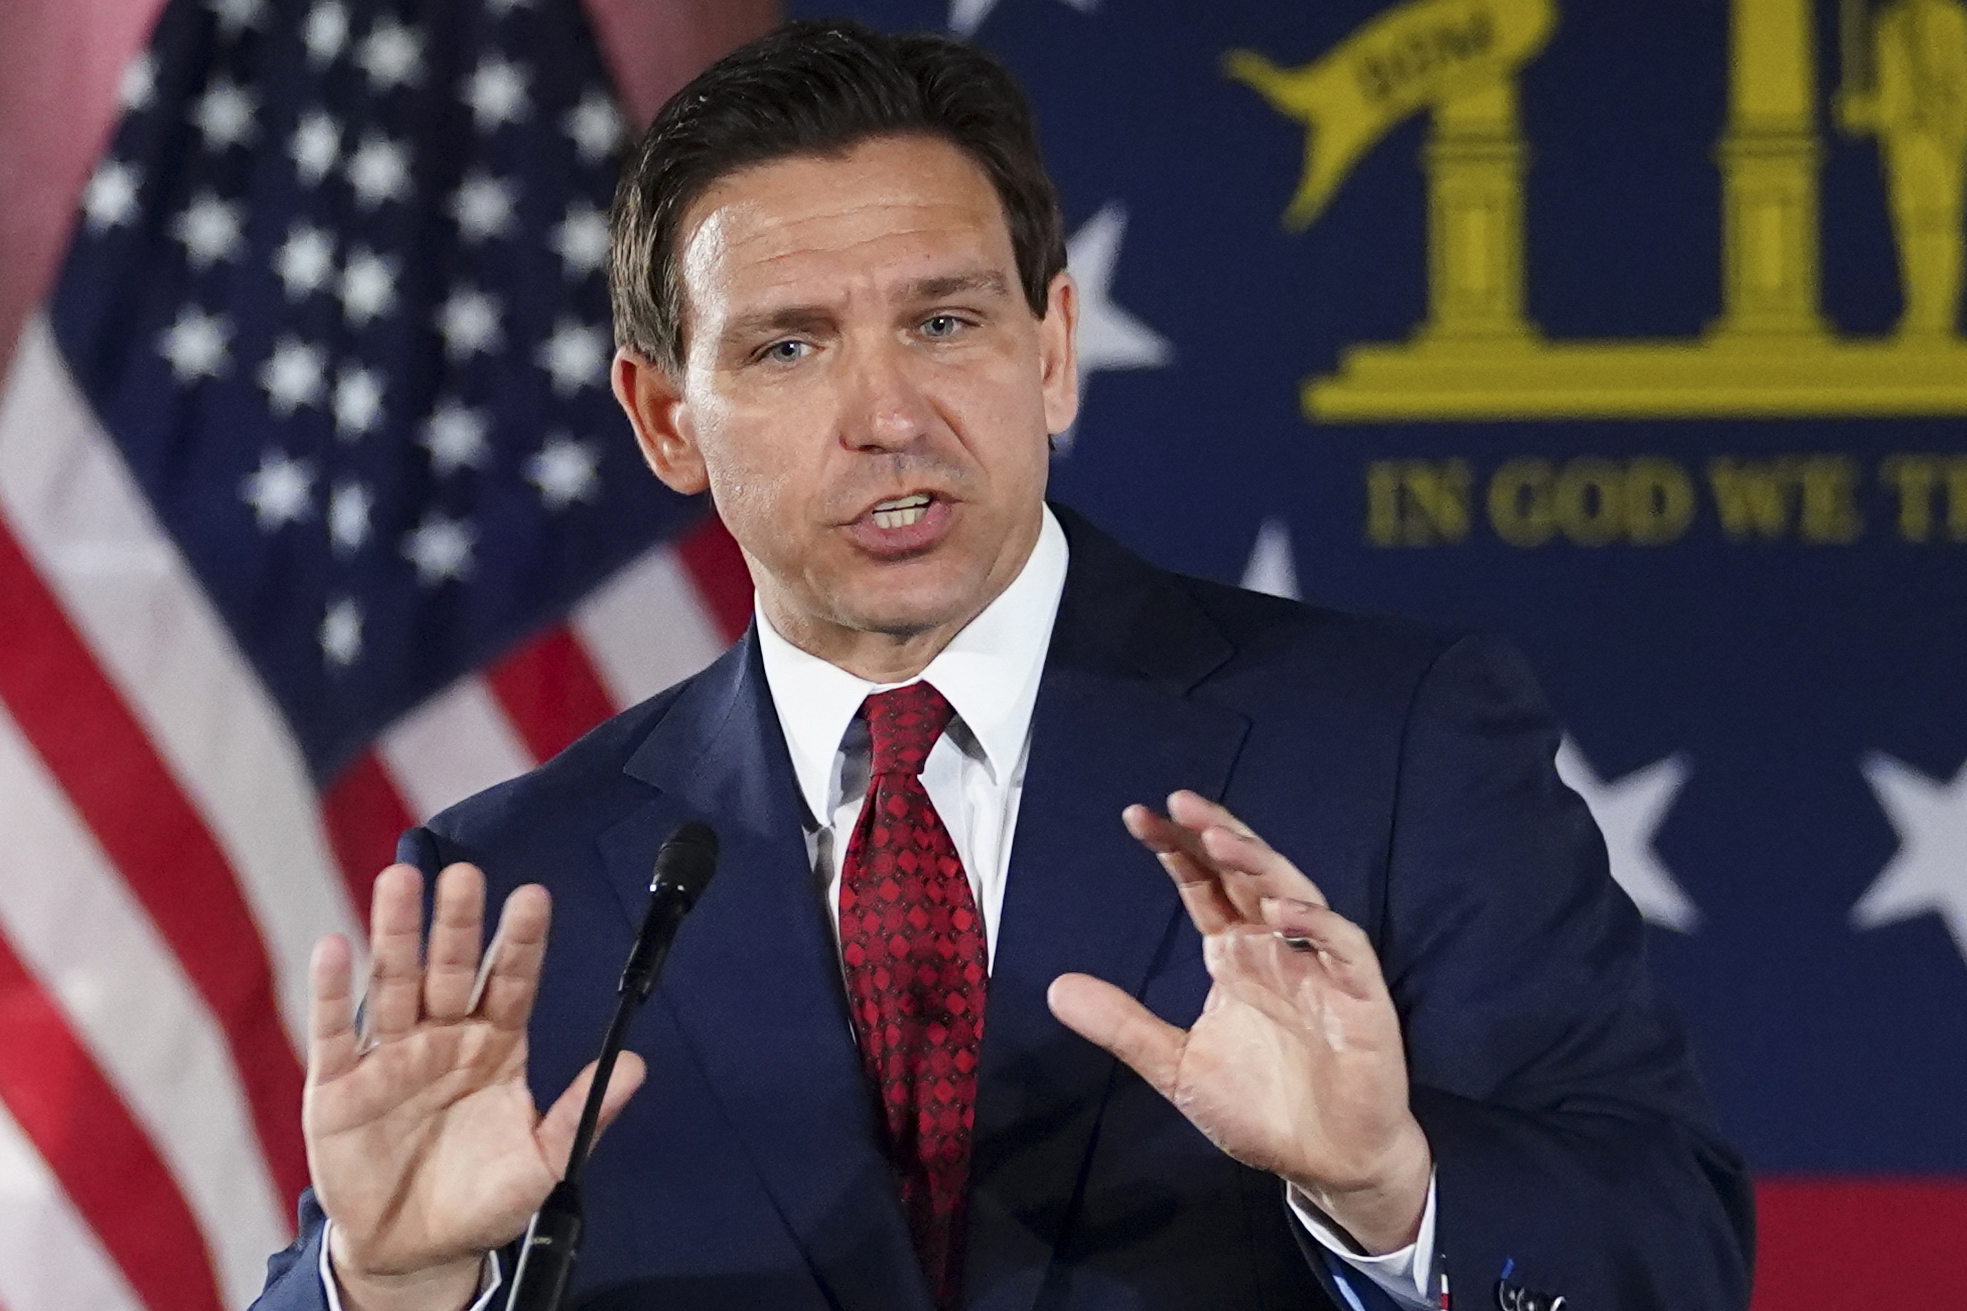 DeSantis purposely dismantled a Black congressional district, attorney says as trial over map begins